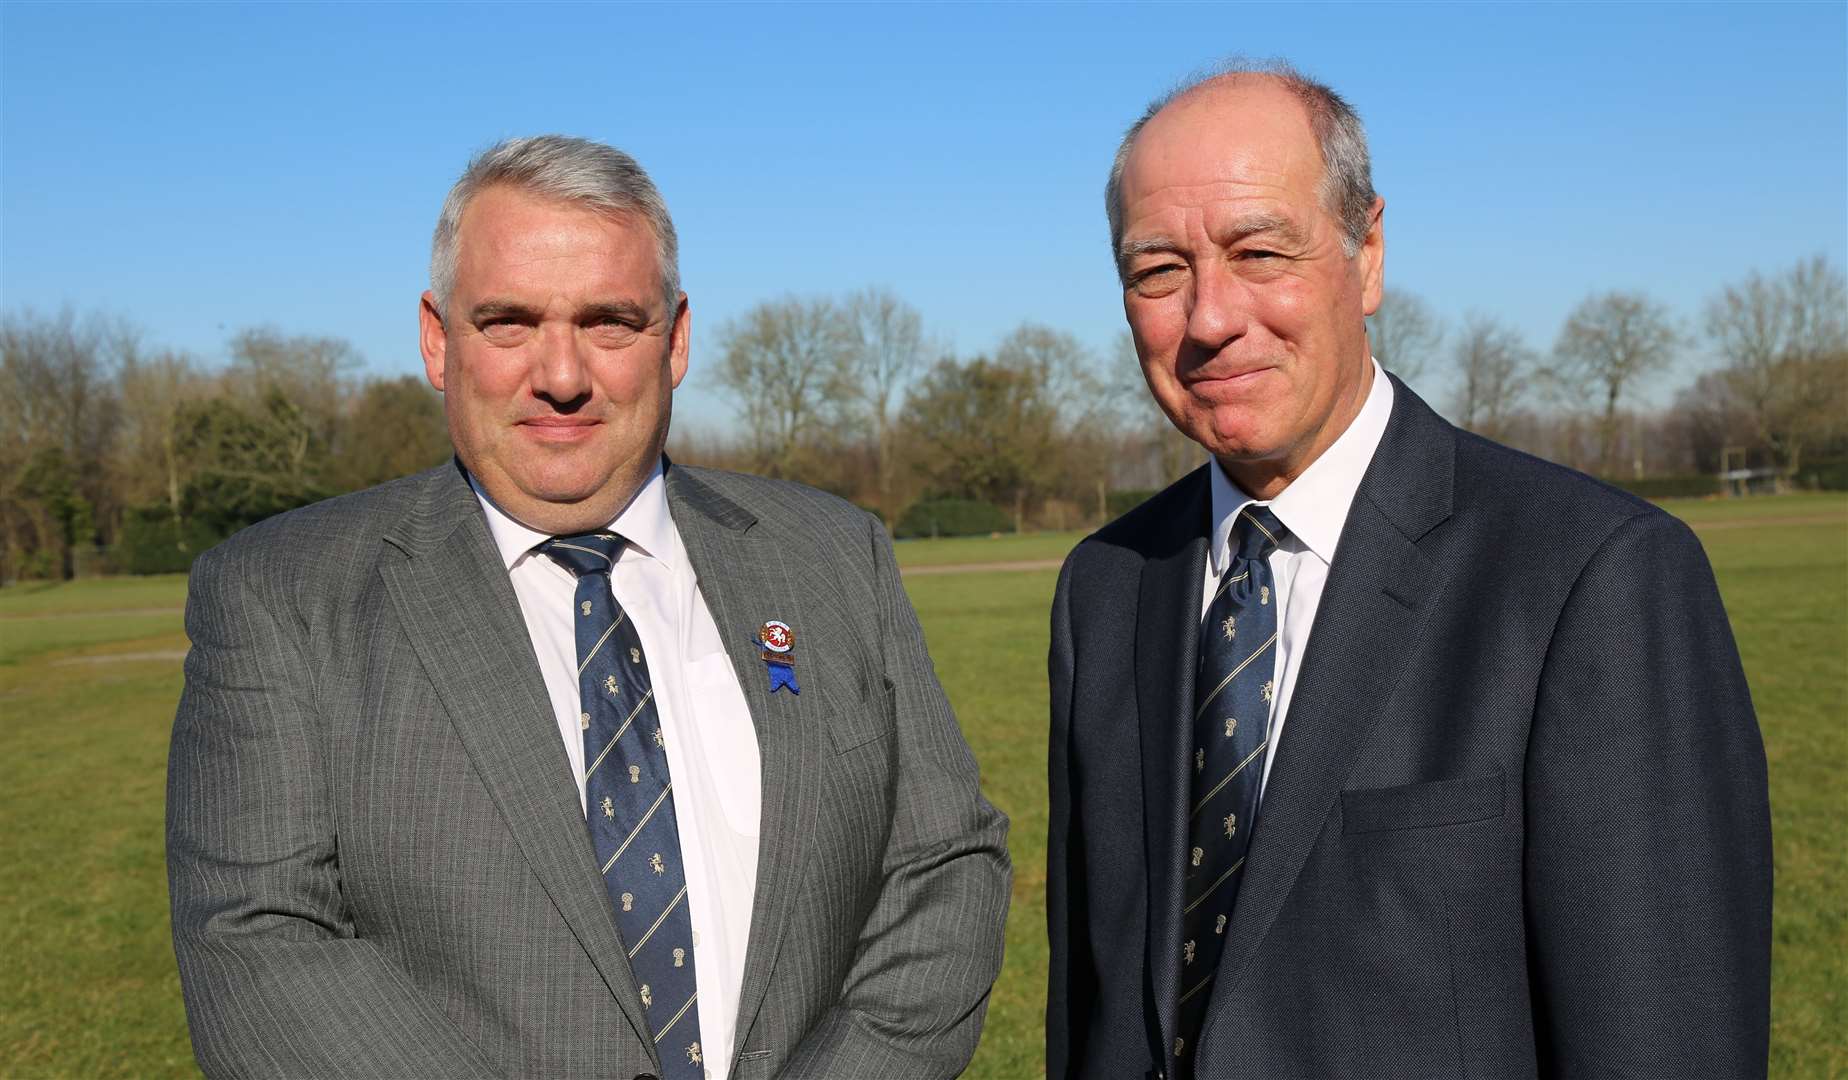 James Forknall, new chairman of the Kent County Agricultural Society with outgoing chairman Kevin Attwood